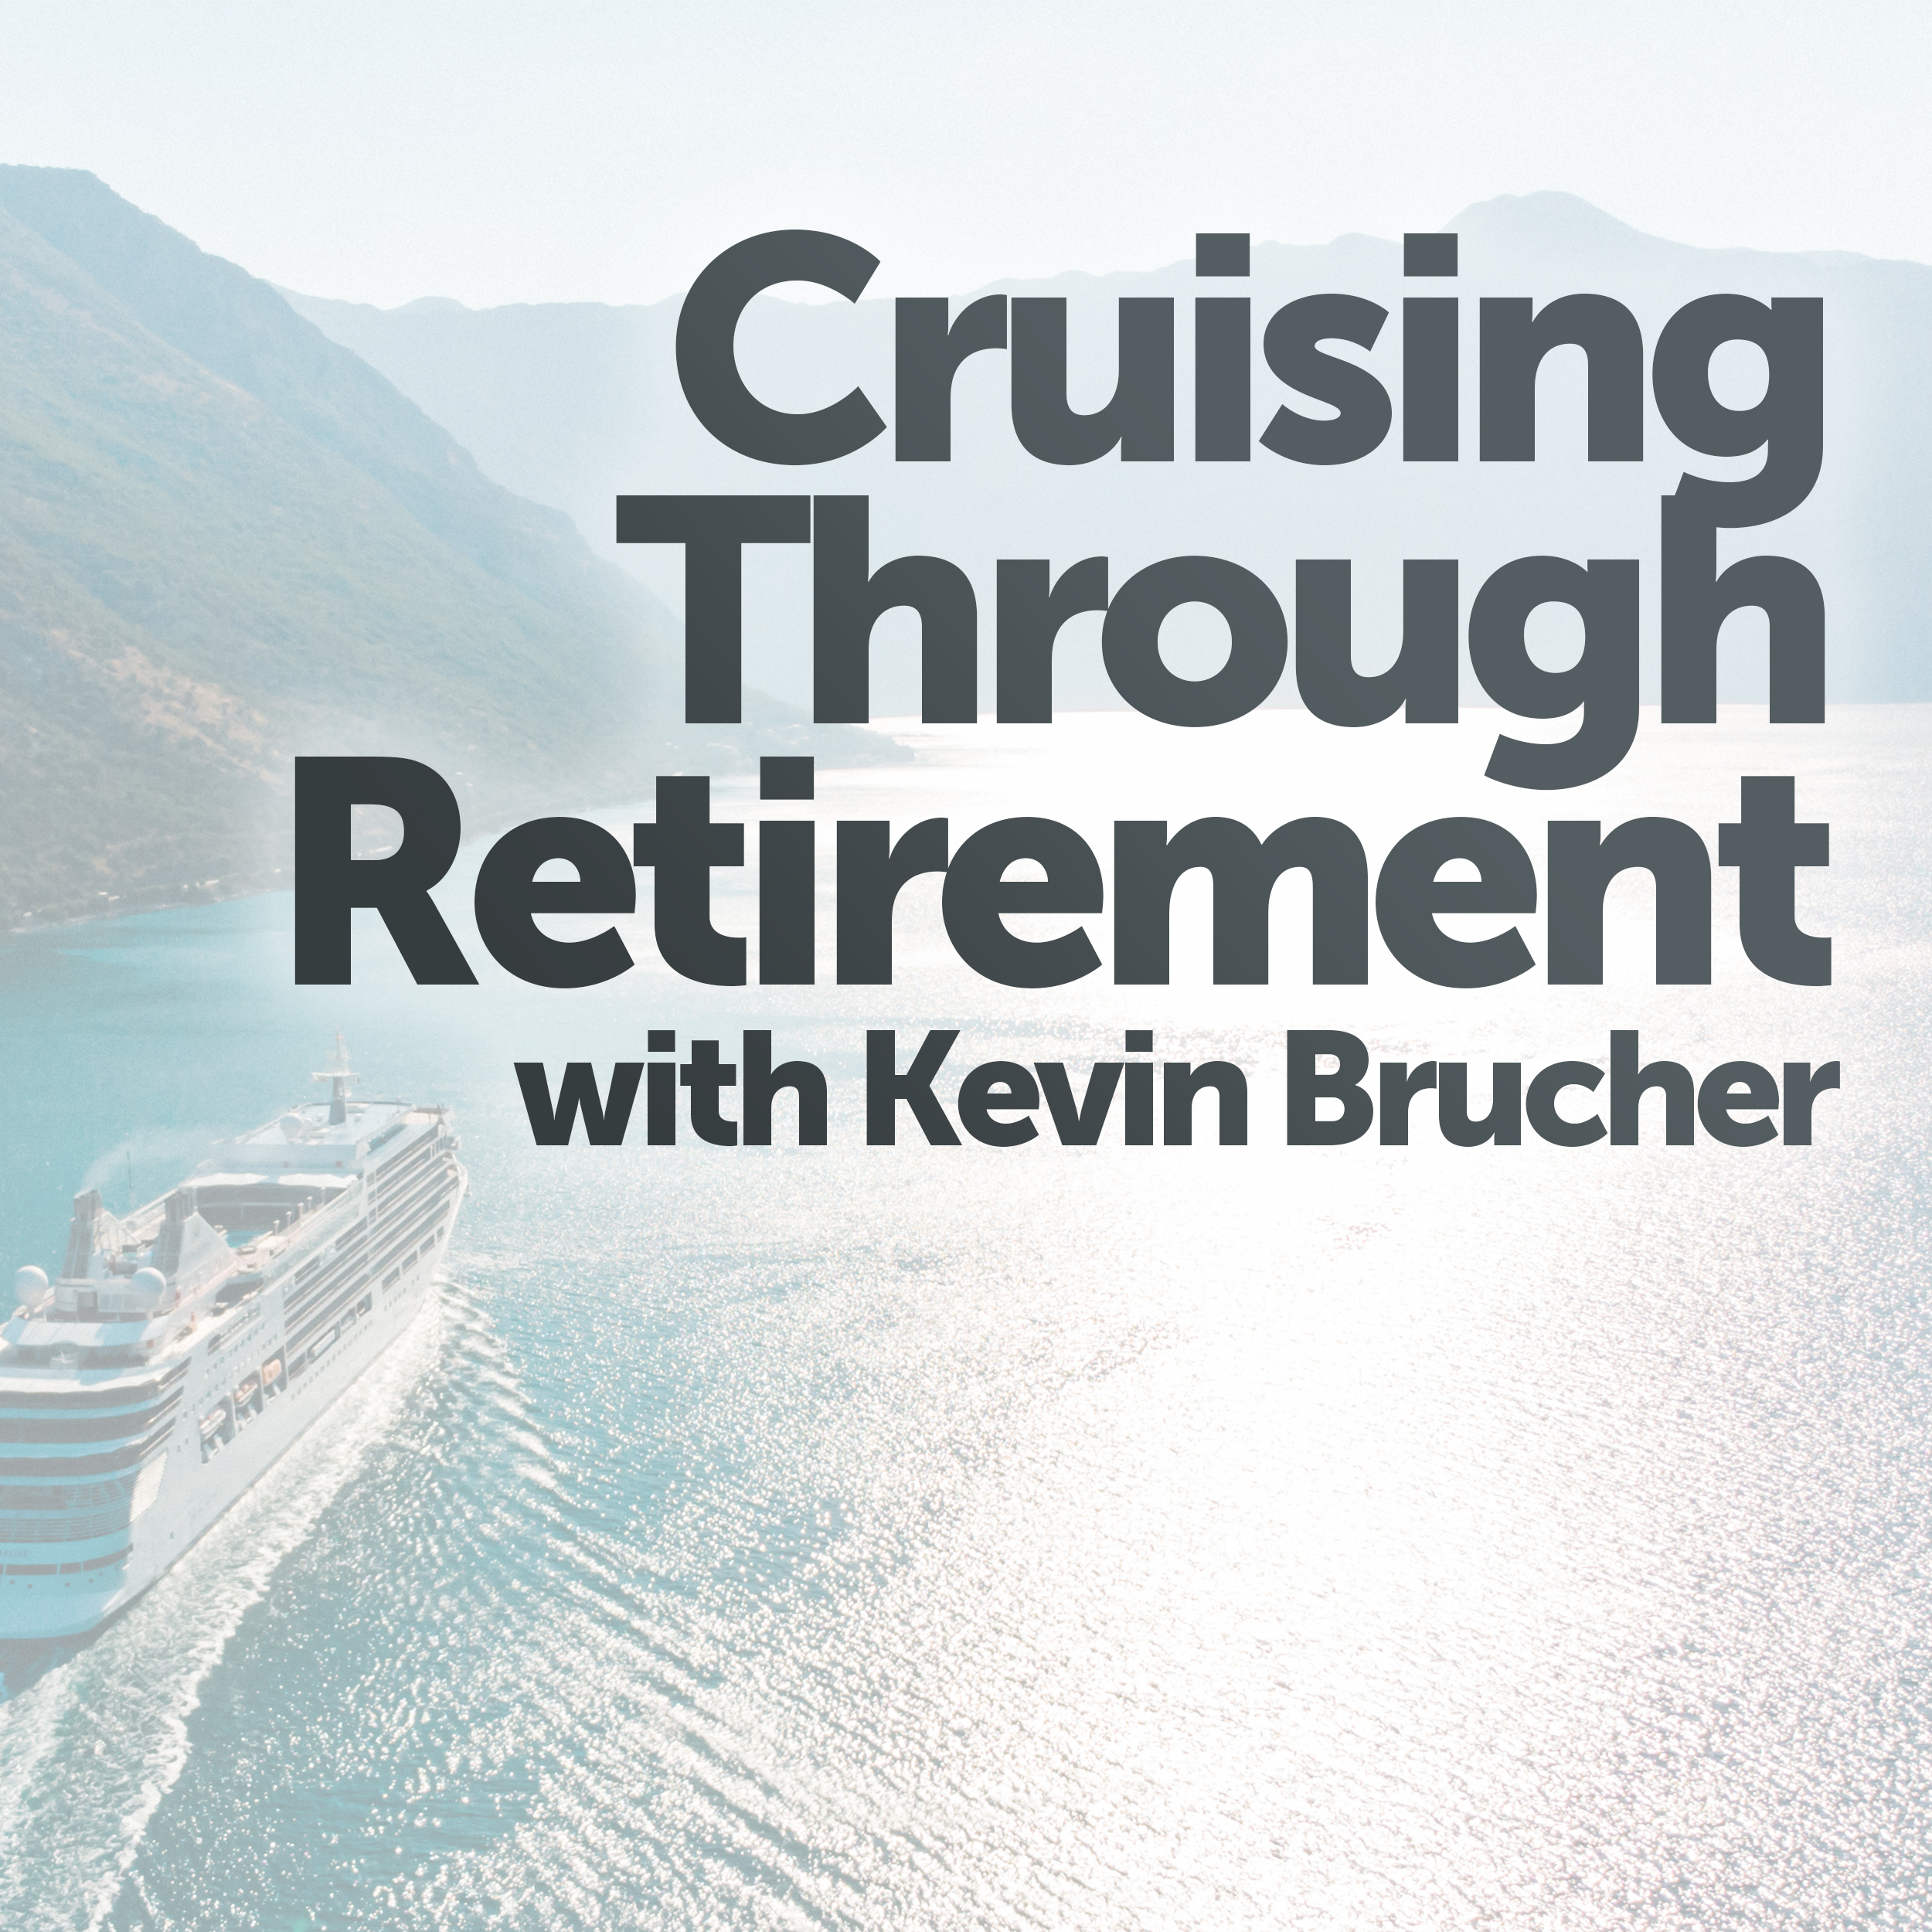 Cruising Through Retirement  Kevin Brucher outlines some things baby boomers should be doing to make sure their money lasts all the way through retirement.